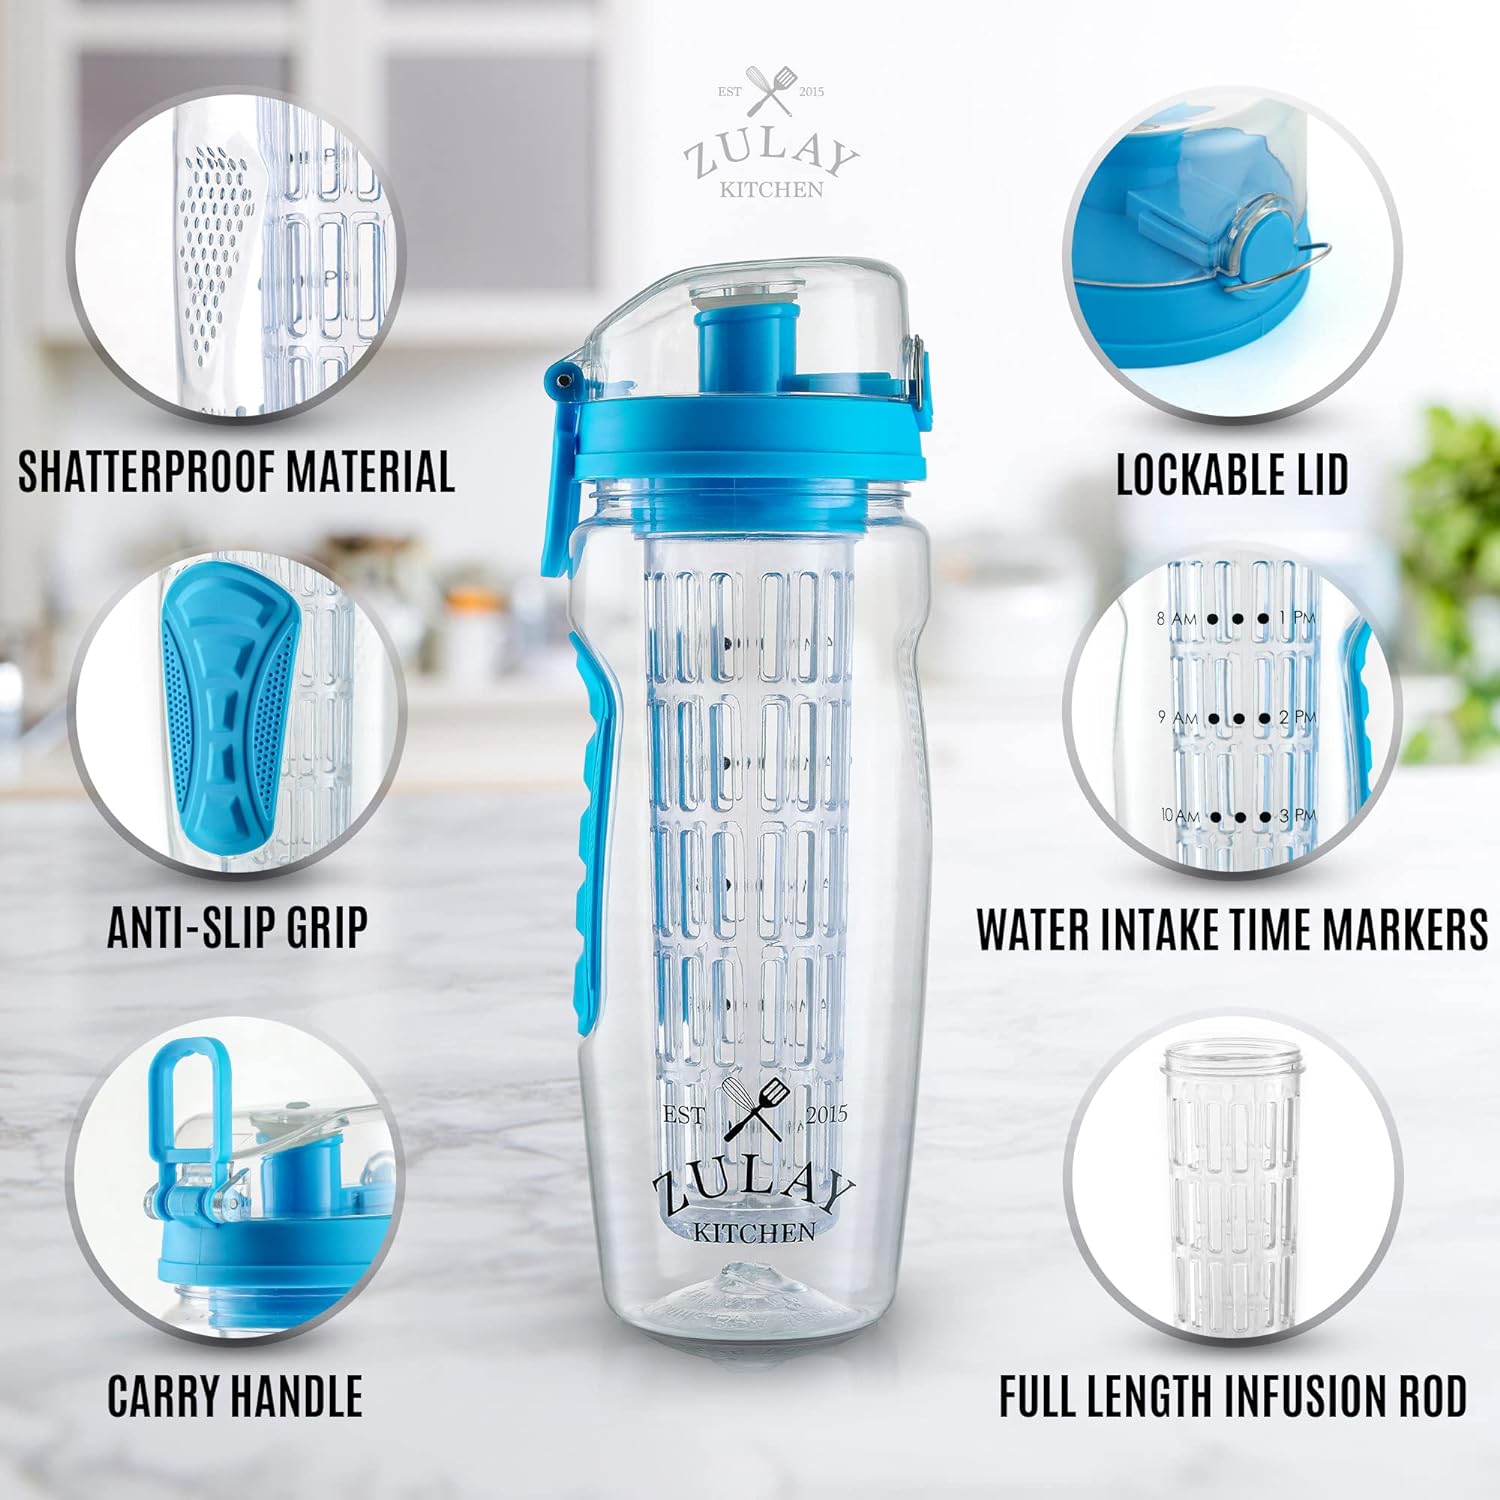 Zulay Kitchen Portable Water Bottle with Fruit Infuser - Blue